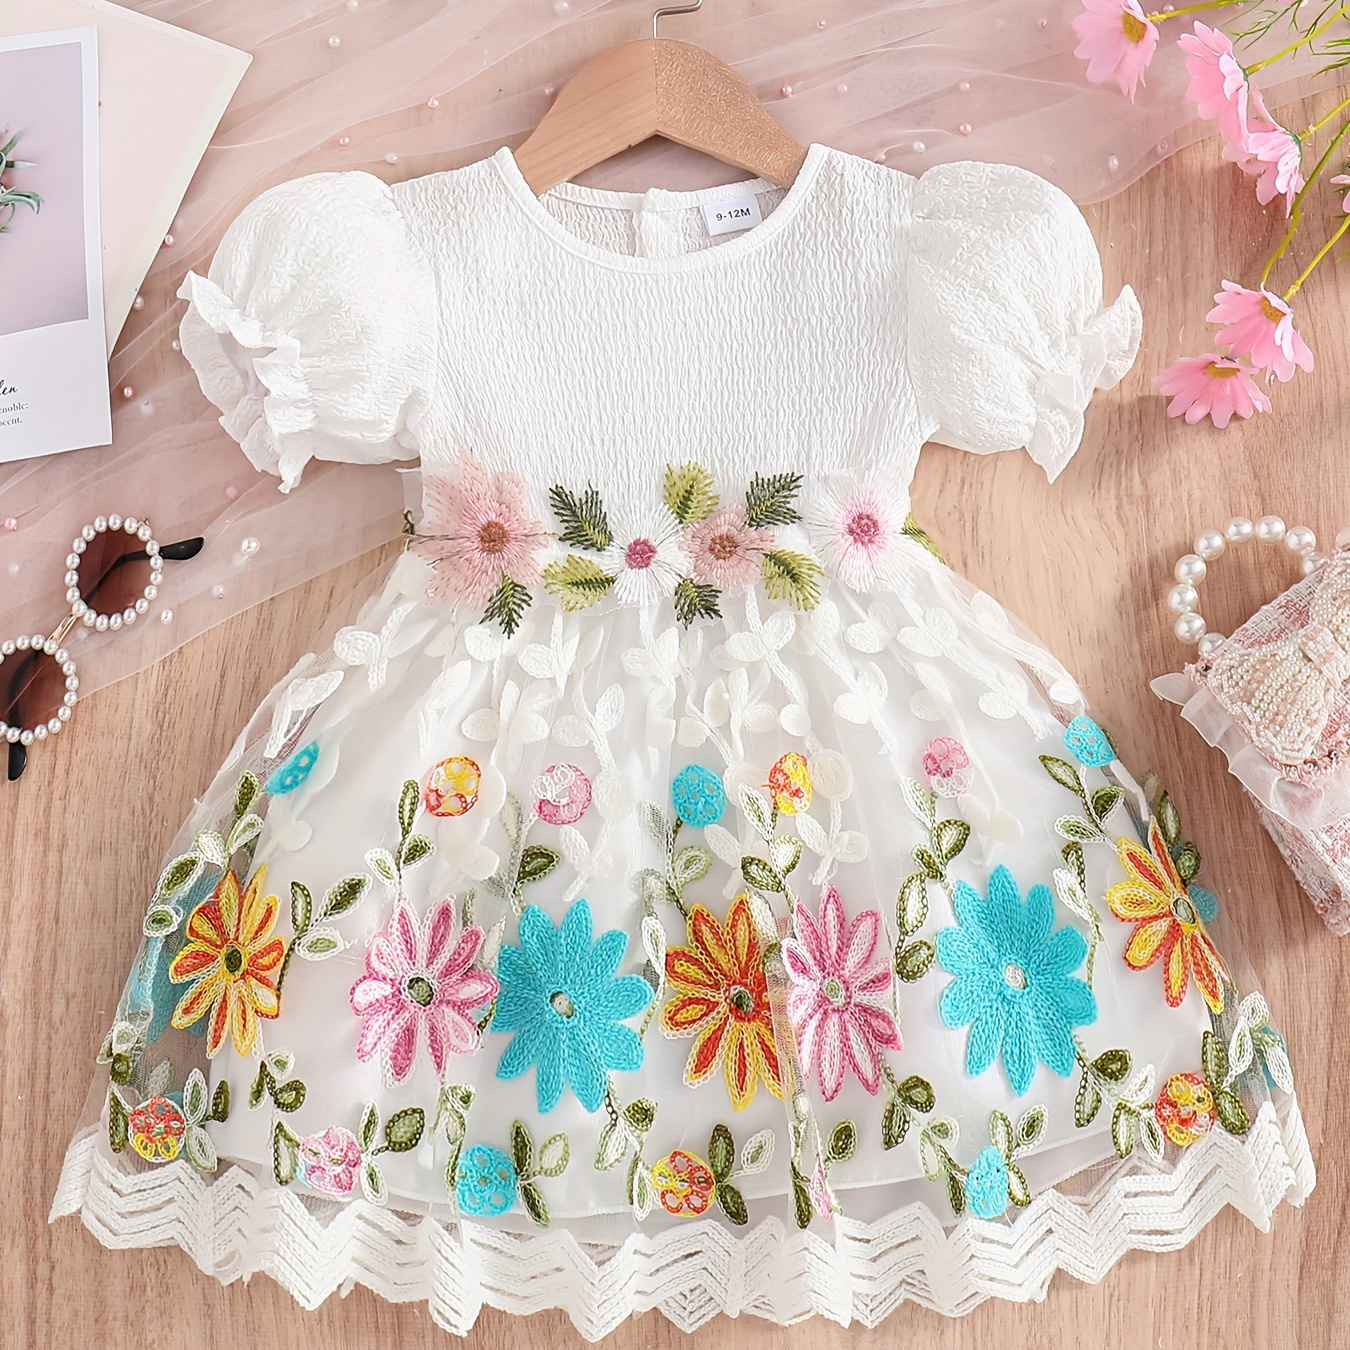 

Baby's Colorful Flower Embroidered Mesh Splicing Dress, Elegant Puff Sleeve Dress, Infant & Toddler Girl's Clothing For Summer/spring, As Gift